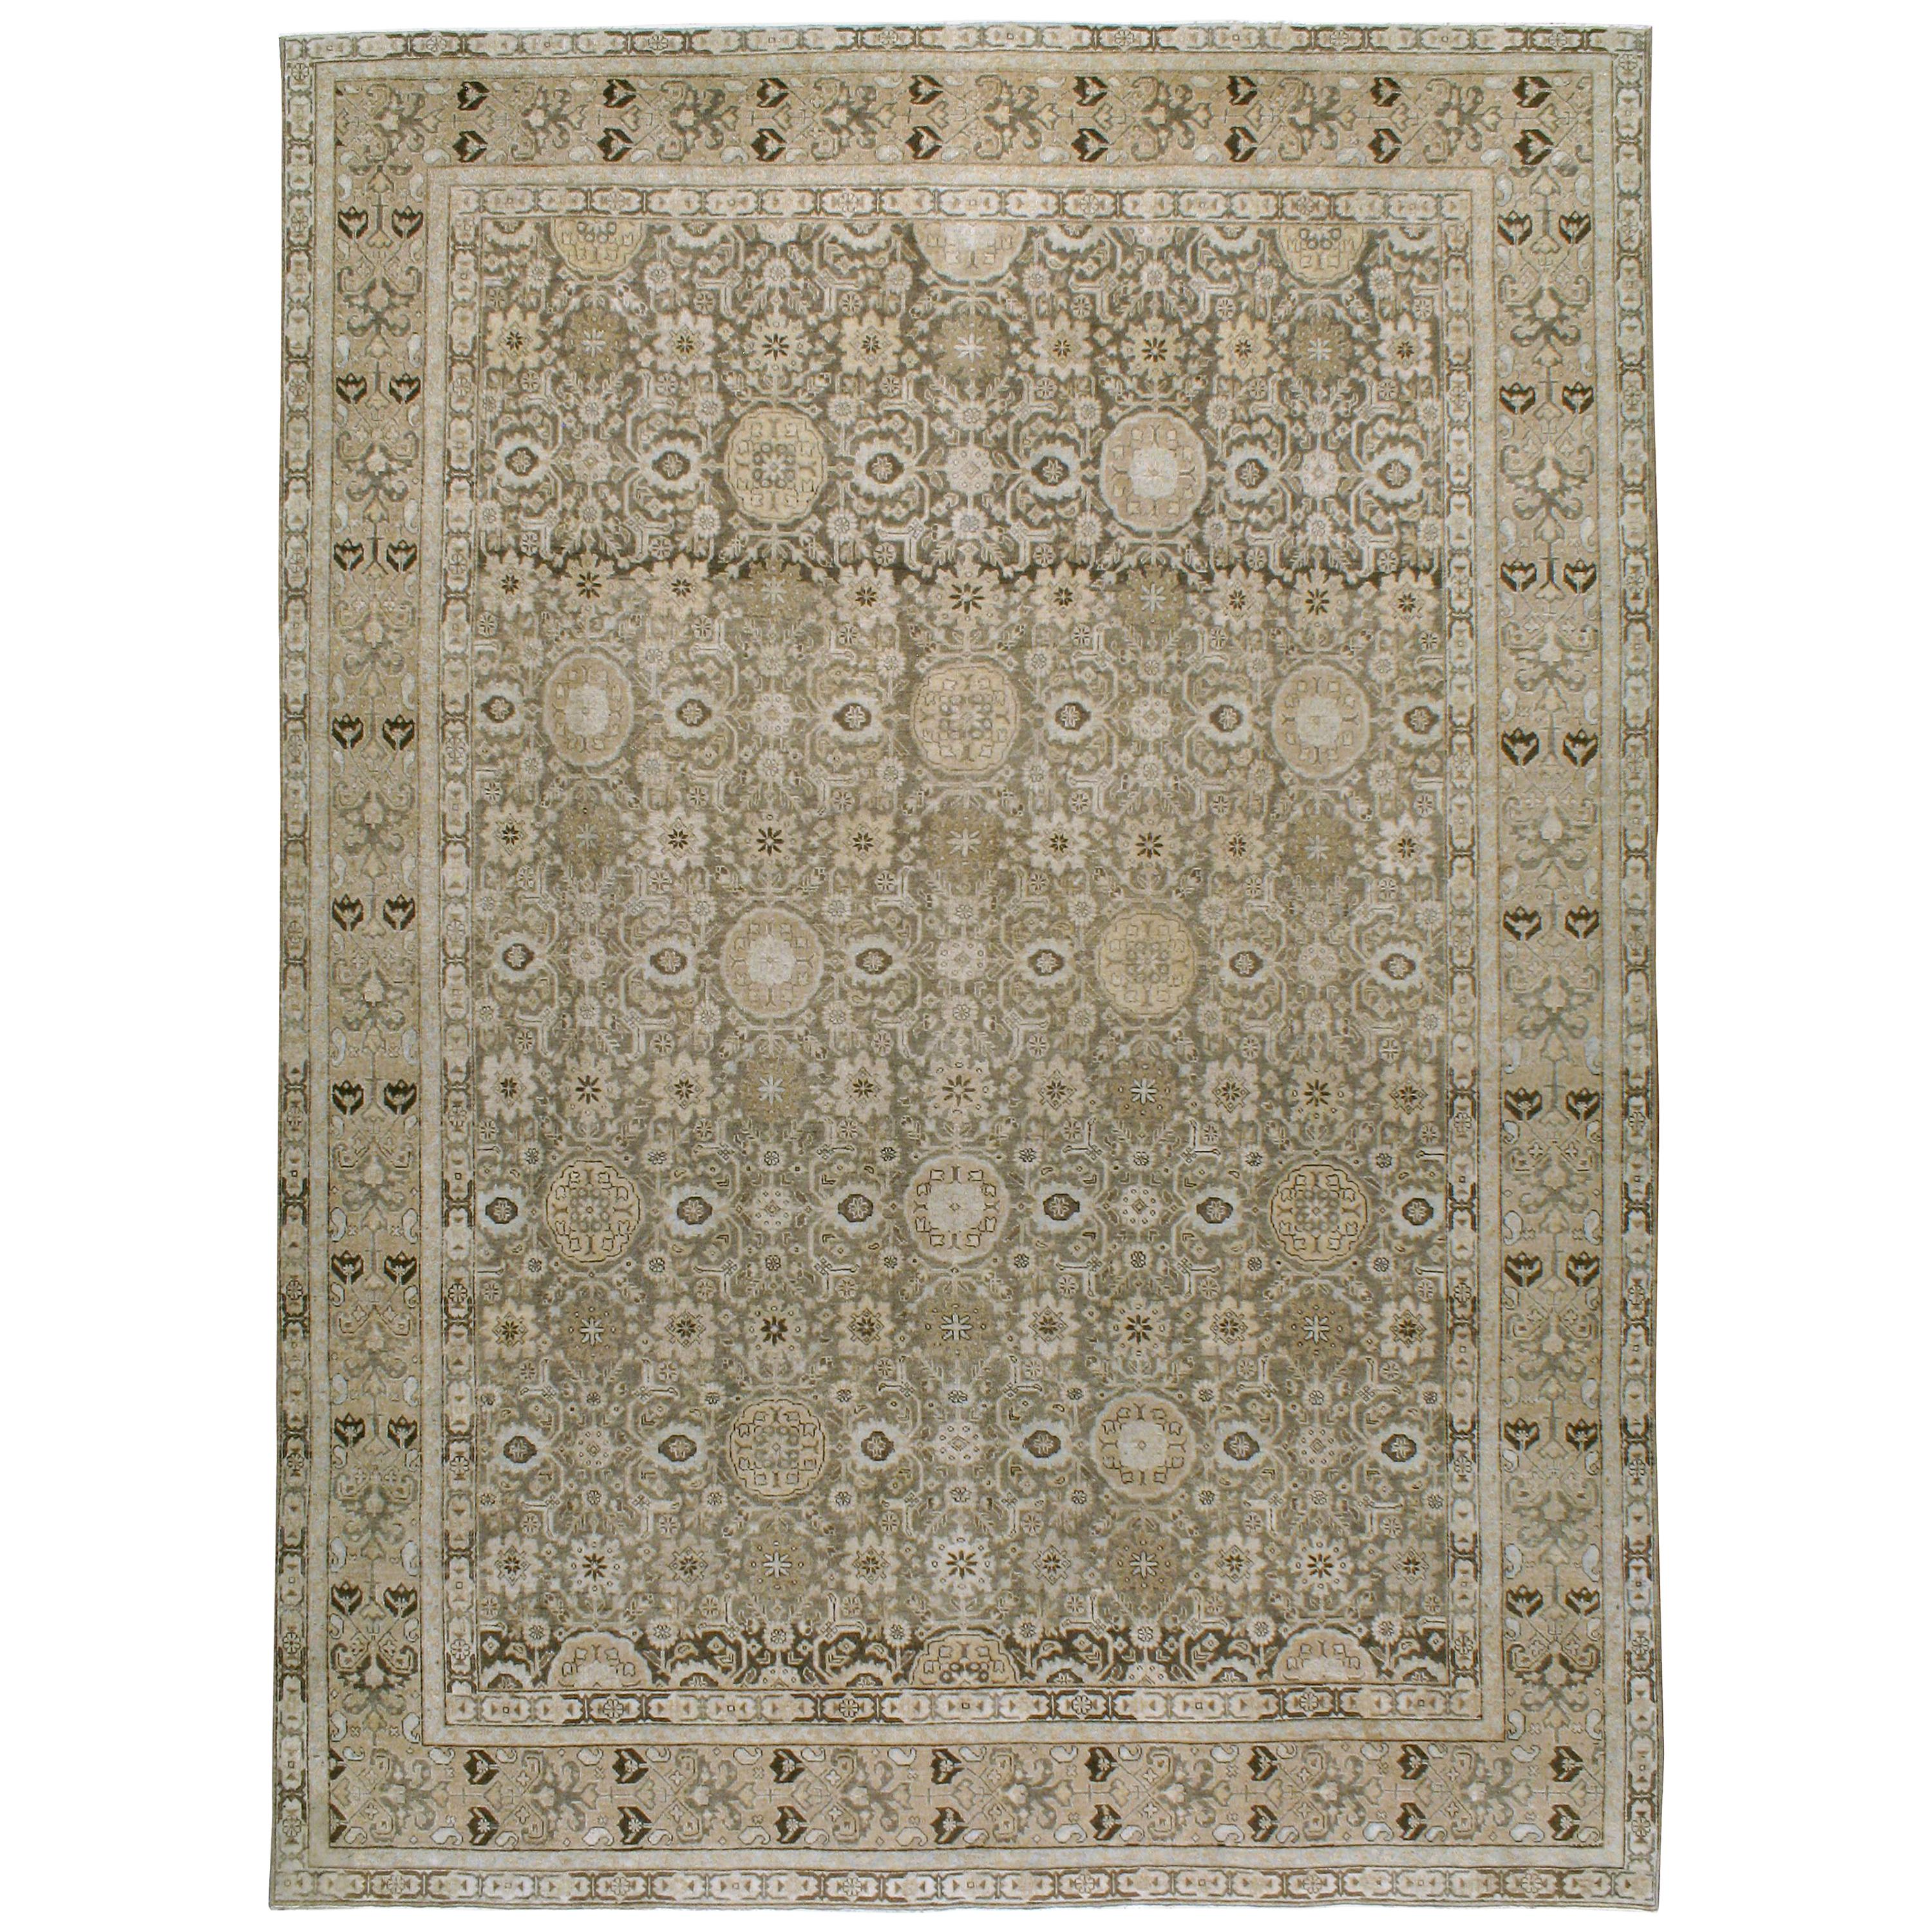 Early 20th Century Handmade Persian Tabriz Room Size Carpet In Neutral Colors For Sale